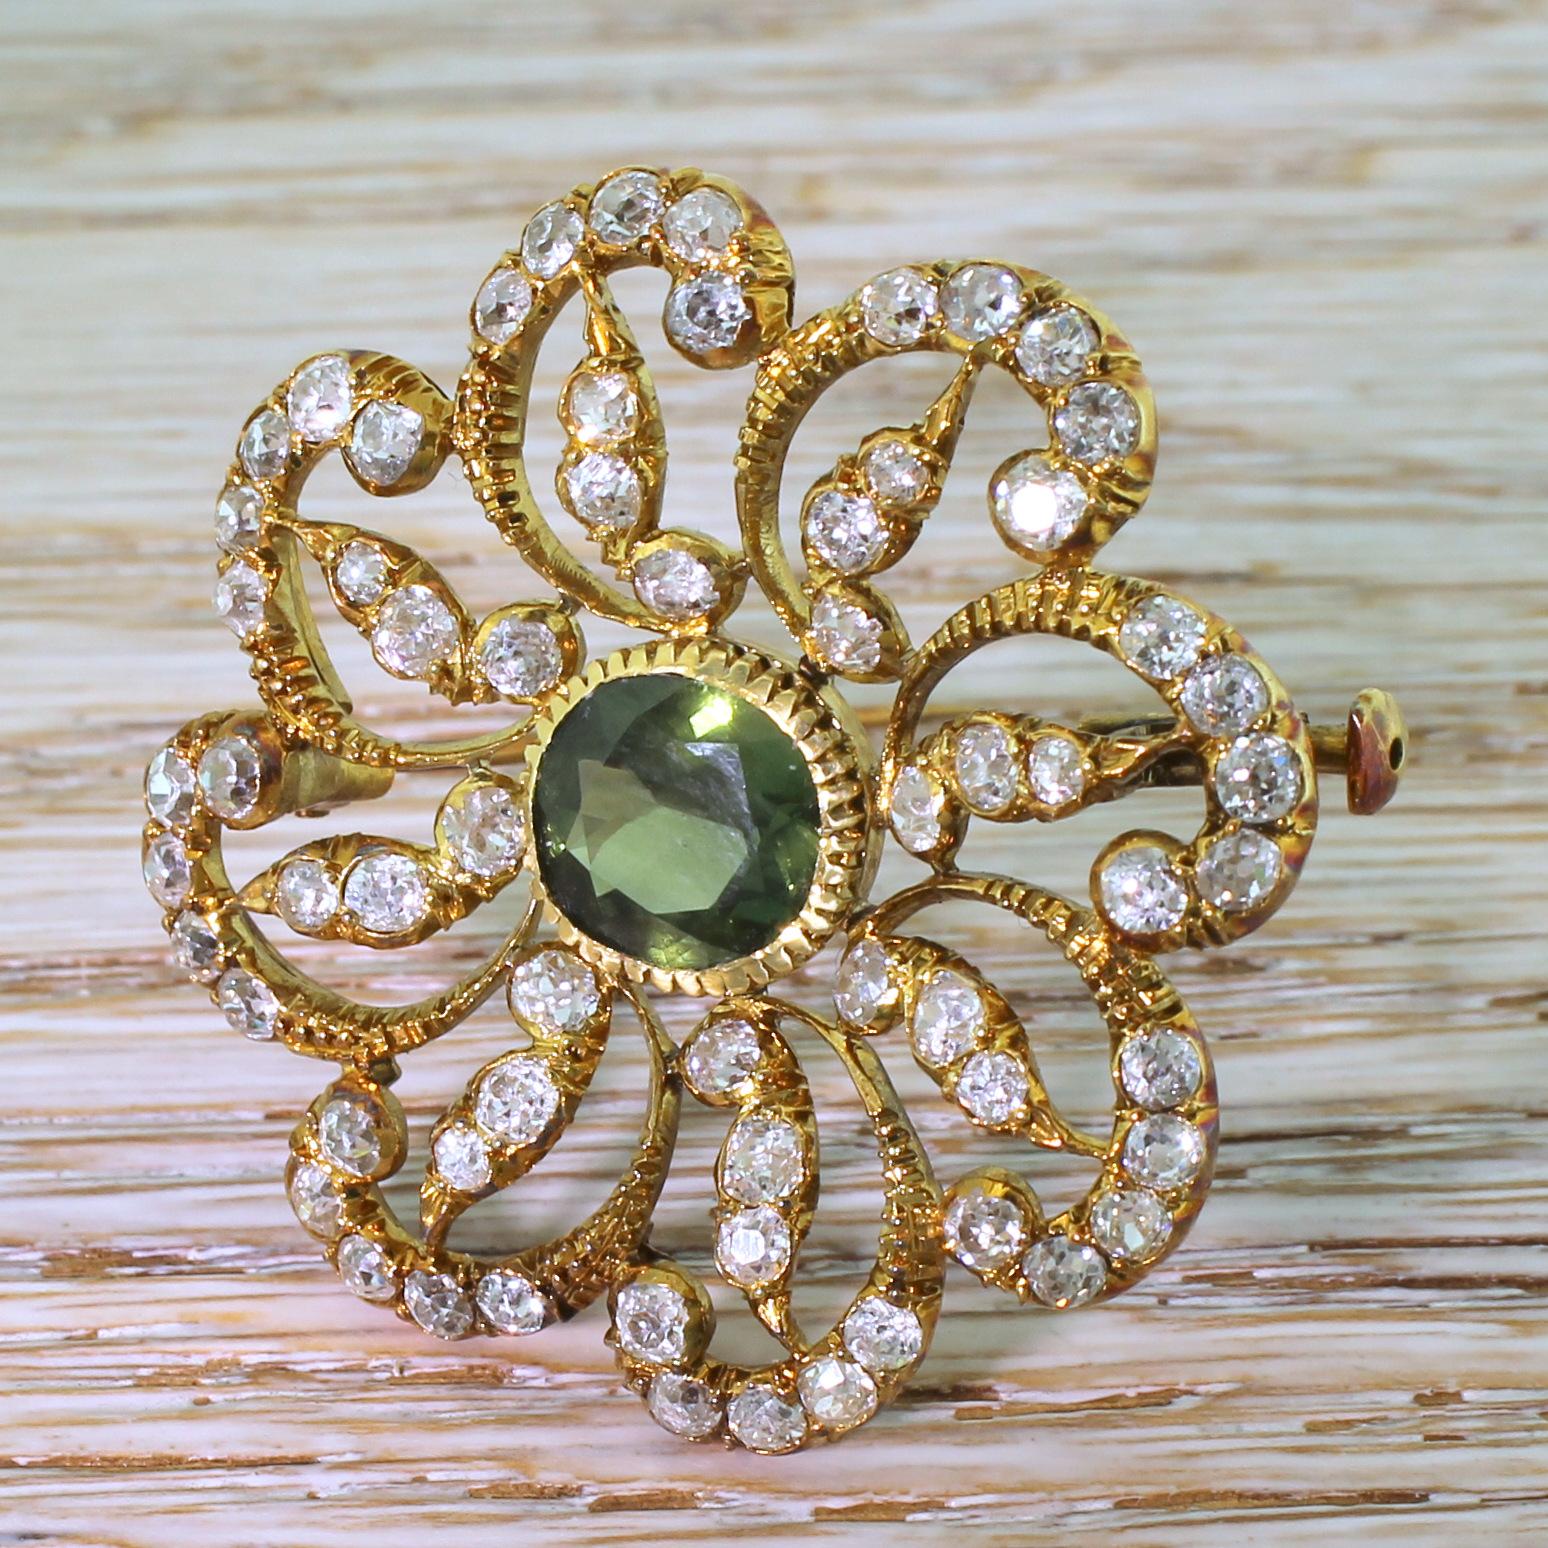 A wonderfully impressive Victorian brooch. Set at the centre is a slightly cushion shaped sapphire which displays a bright, olive-y green. The stunning, swirling surround is set with 64 white and bright old cut diamonds in finely grained yellow